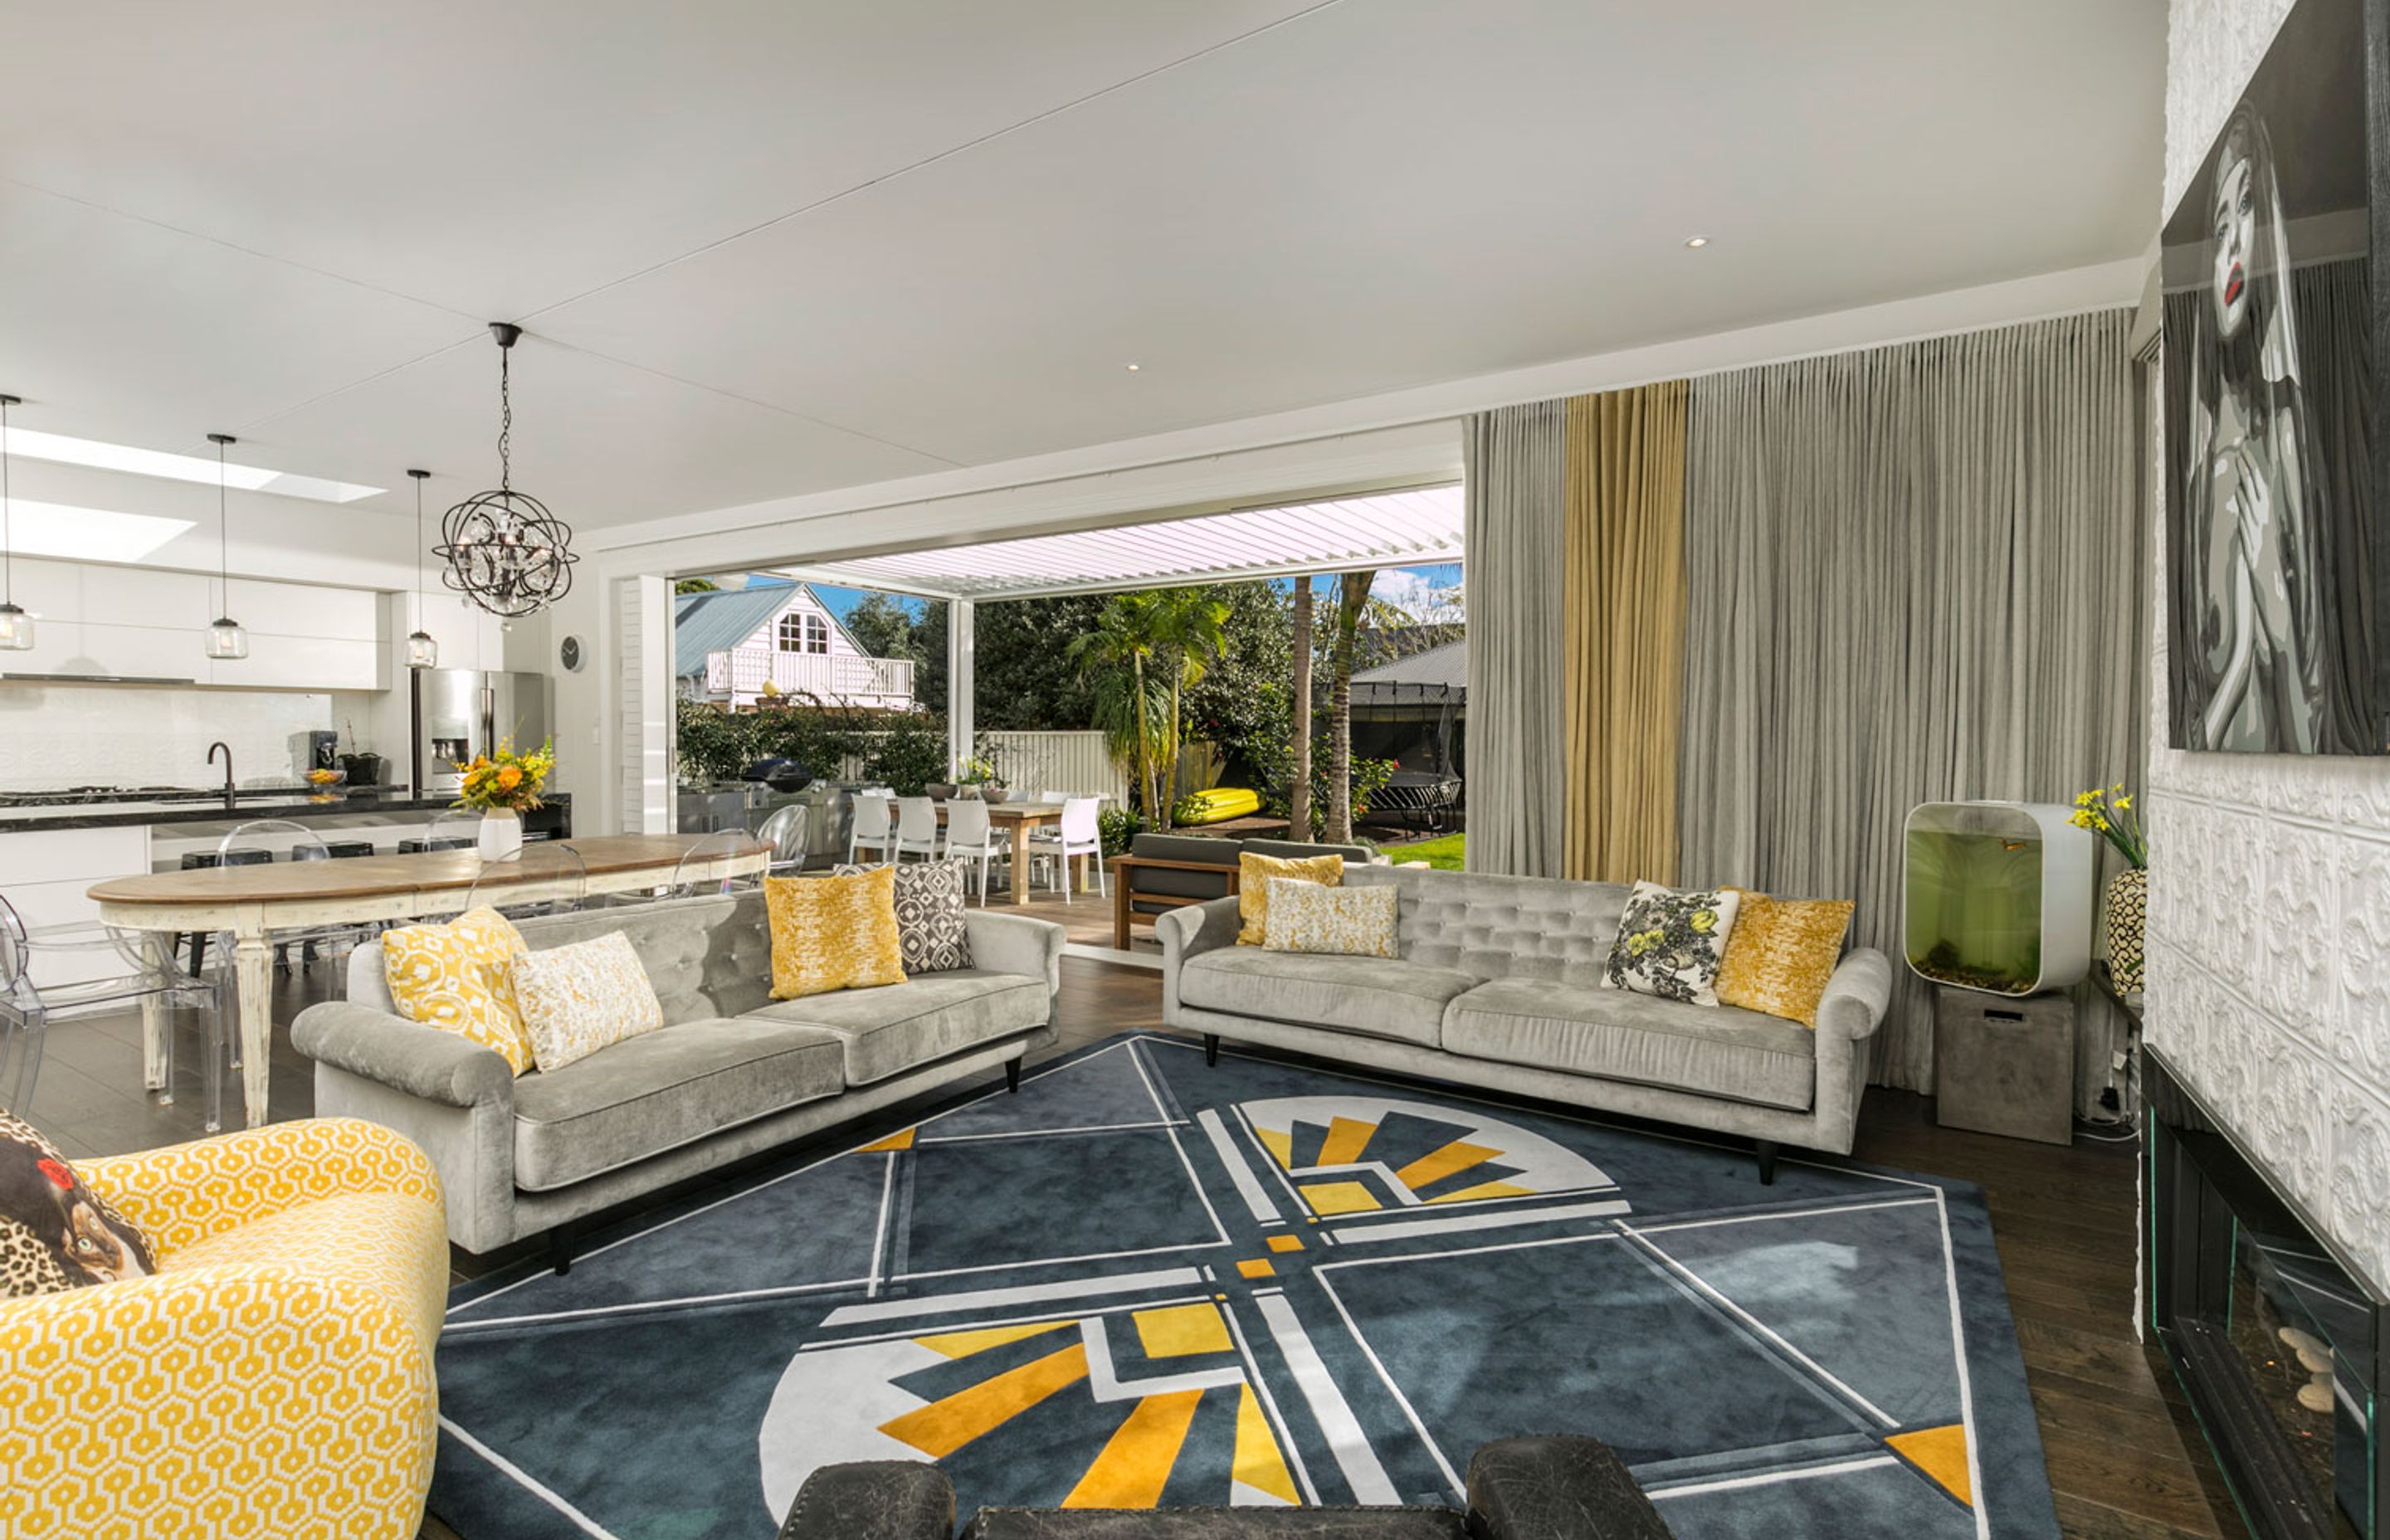 Bold accent of yellow connected the living area, the custom designed rug harked back to a Deco era, and the fireplace faced and kitchen splashback, connected with the Victorian era.